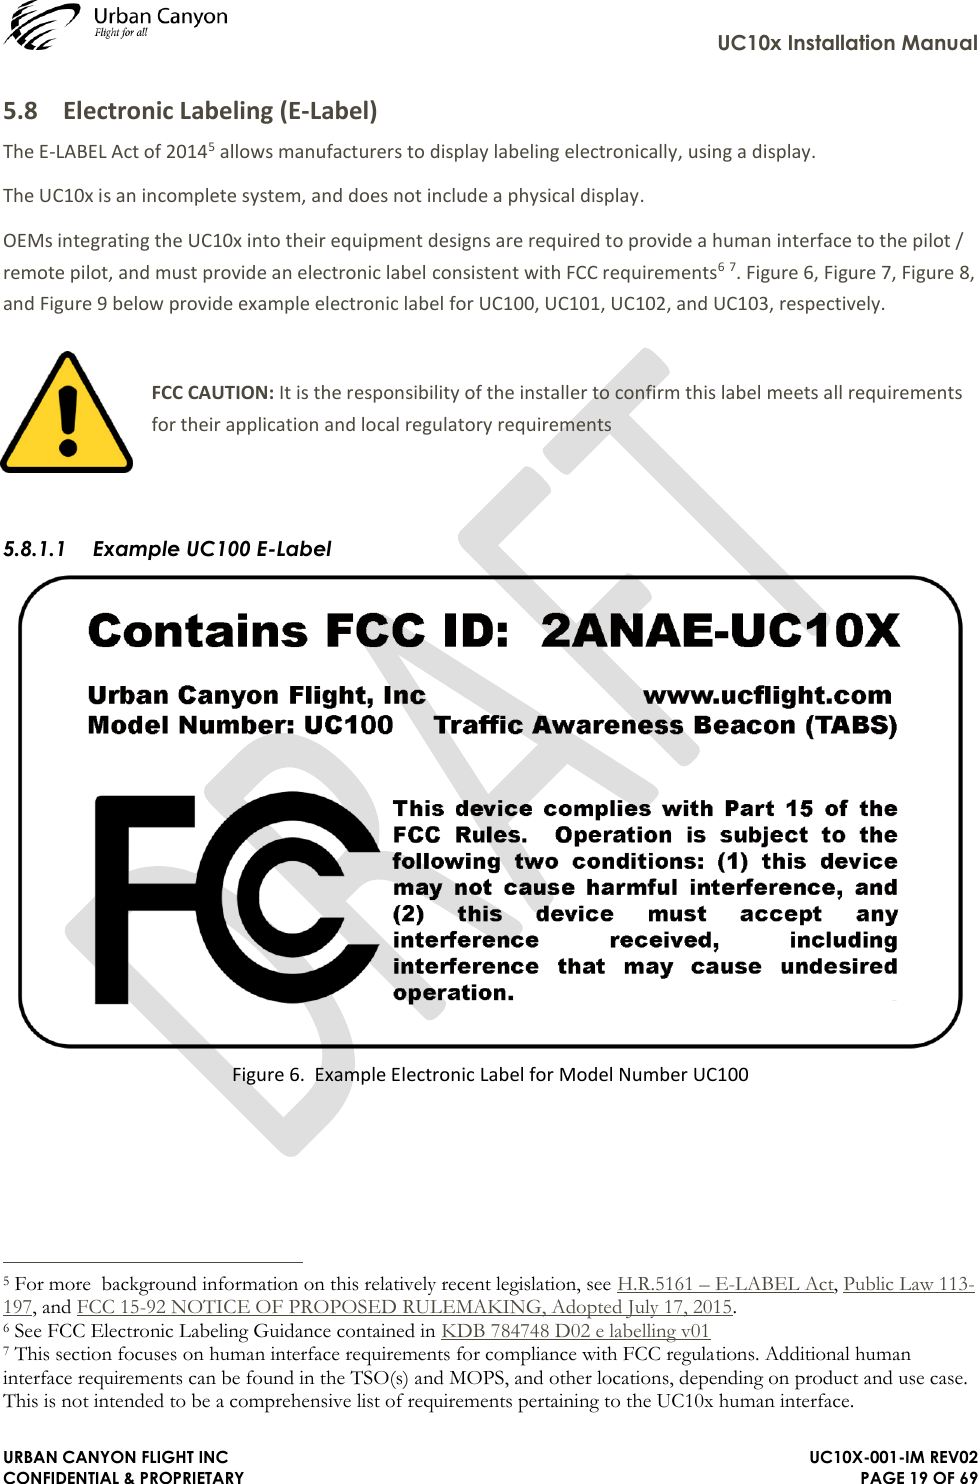     UC10x Installation Manual  URBAN CANYON FLIGHT INC   UC10X-001-IM REV02 CONFIDENTIAL &amp; PROPRIETARY PAGE 19 OF 69 5.8 Electronic Labeling (E-Label) The E-LABEL Act of 20145 allows manufacturers to display labeling electronically, using a display. The UC10x is an incomplete system, and does not include a physical display.  OEMs integrating the UC10x into their equipment designs are required to provide a human interface to the pilot / remote pilot, and must provide an electronic label consistent with FCC requirements6 7. Figure 6, Figure 7, Figure 8, and Figure 9 below provide example electronic label for UC100, UC101, UC102, and UC103, respectively.  FCC CAUTION: It is the responsibility of the installer to confirm this label meets all requirements for their application and local regulatory requirements   5.8.1.1 Example UC100 E-Label  Figure 6.  Example Electronic Label for Model Number UC100                                                                  5 For more  background information on this relatively recent legislation, see H.R.5161 – E-LABEL Act, Public Law 113-197, and FCC 15-92 NOTICE OF PROPOSED RULEMAKING, Adopted July 17, 2015. 6 See FCC Electronic Labeling Guidance contained in KDB 784748 D02 e labelling v01  7 This section focuses on human interface requirements for compliance with FCC regulations. Additional human interface requirements can be found in the TSO(s) and MOPS, and other locations, depending on product and use case. This is not intended to be a comprehensive list of requirements pertaining to the UC10x human interface. 